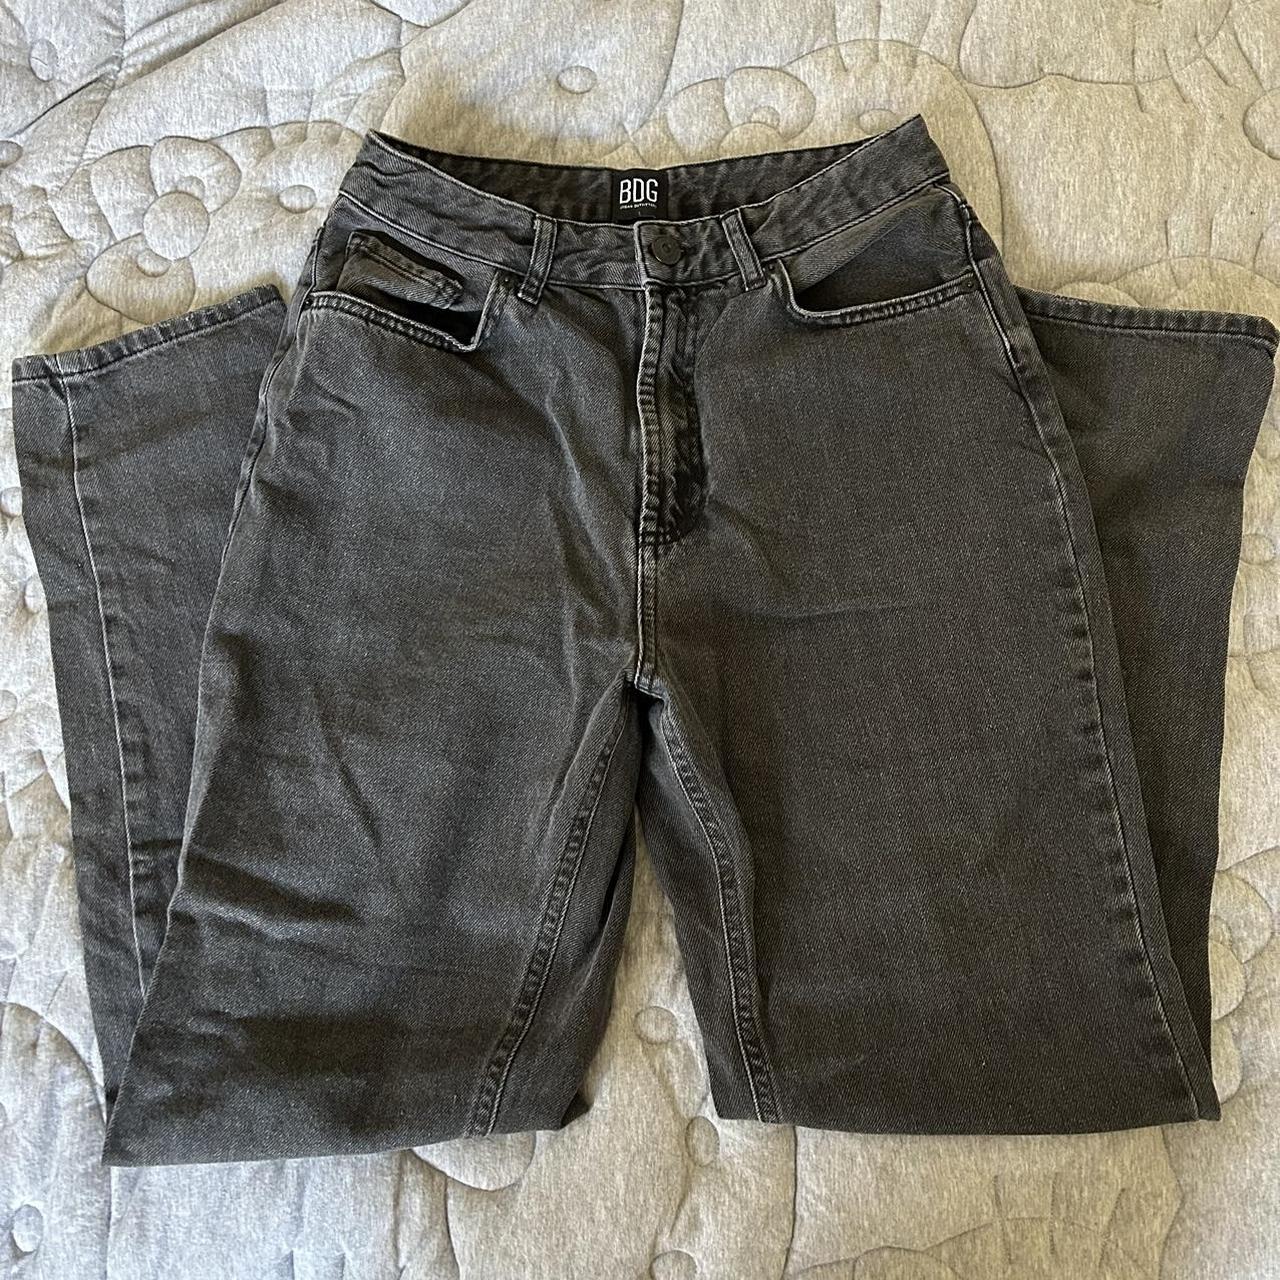 urban outfitters/BDG black mom jeans, worn but in... - Depop